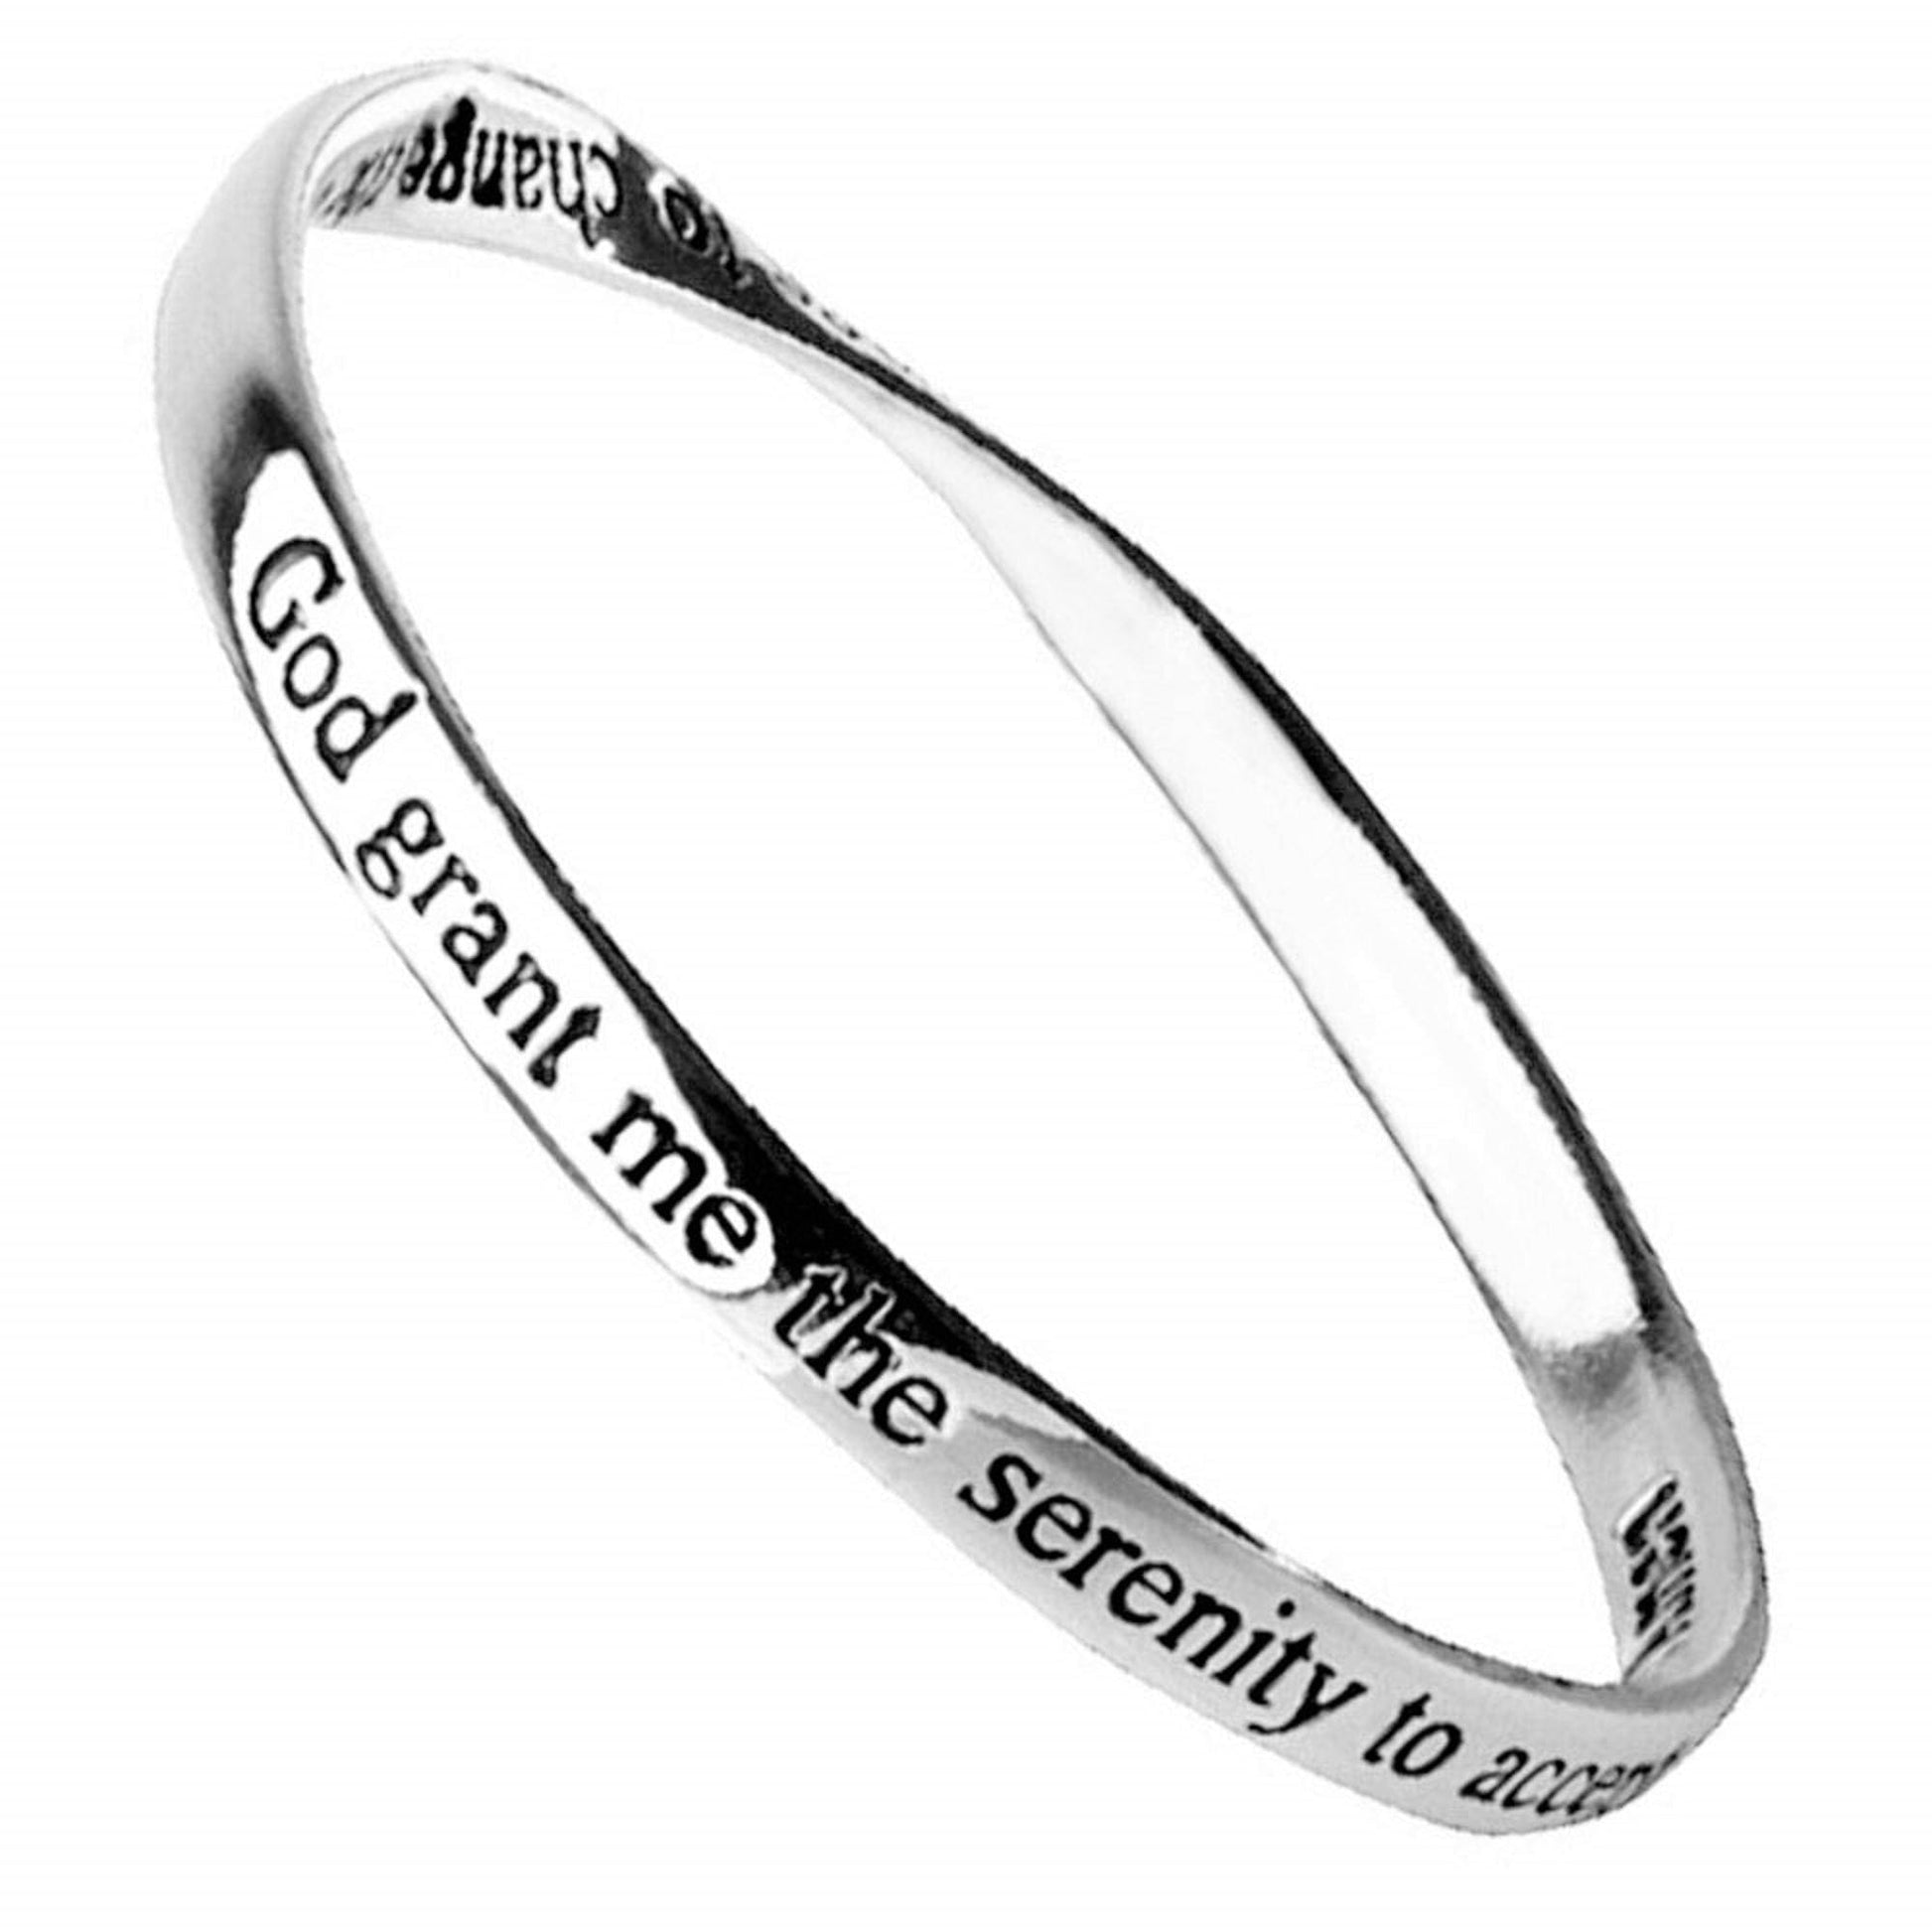 Serenity Prayer Bangle by Recovery Matters